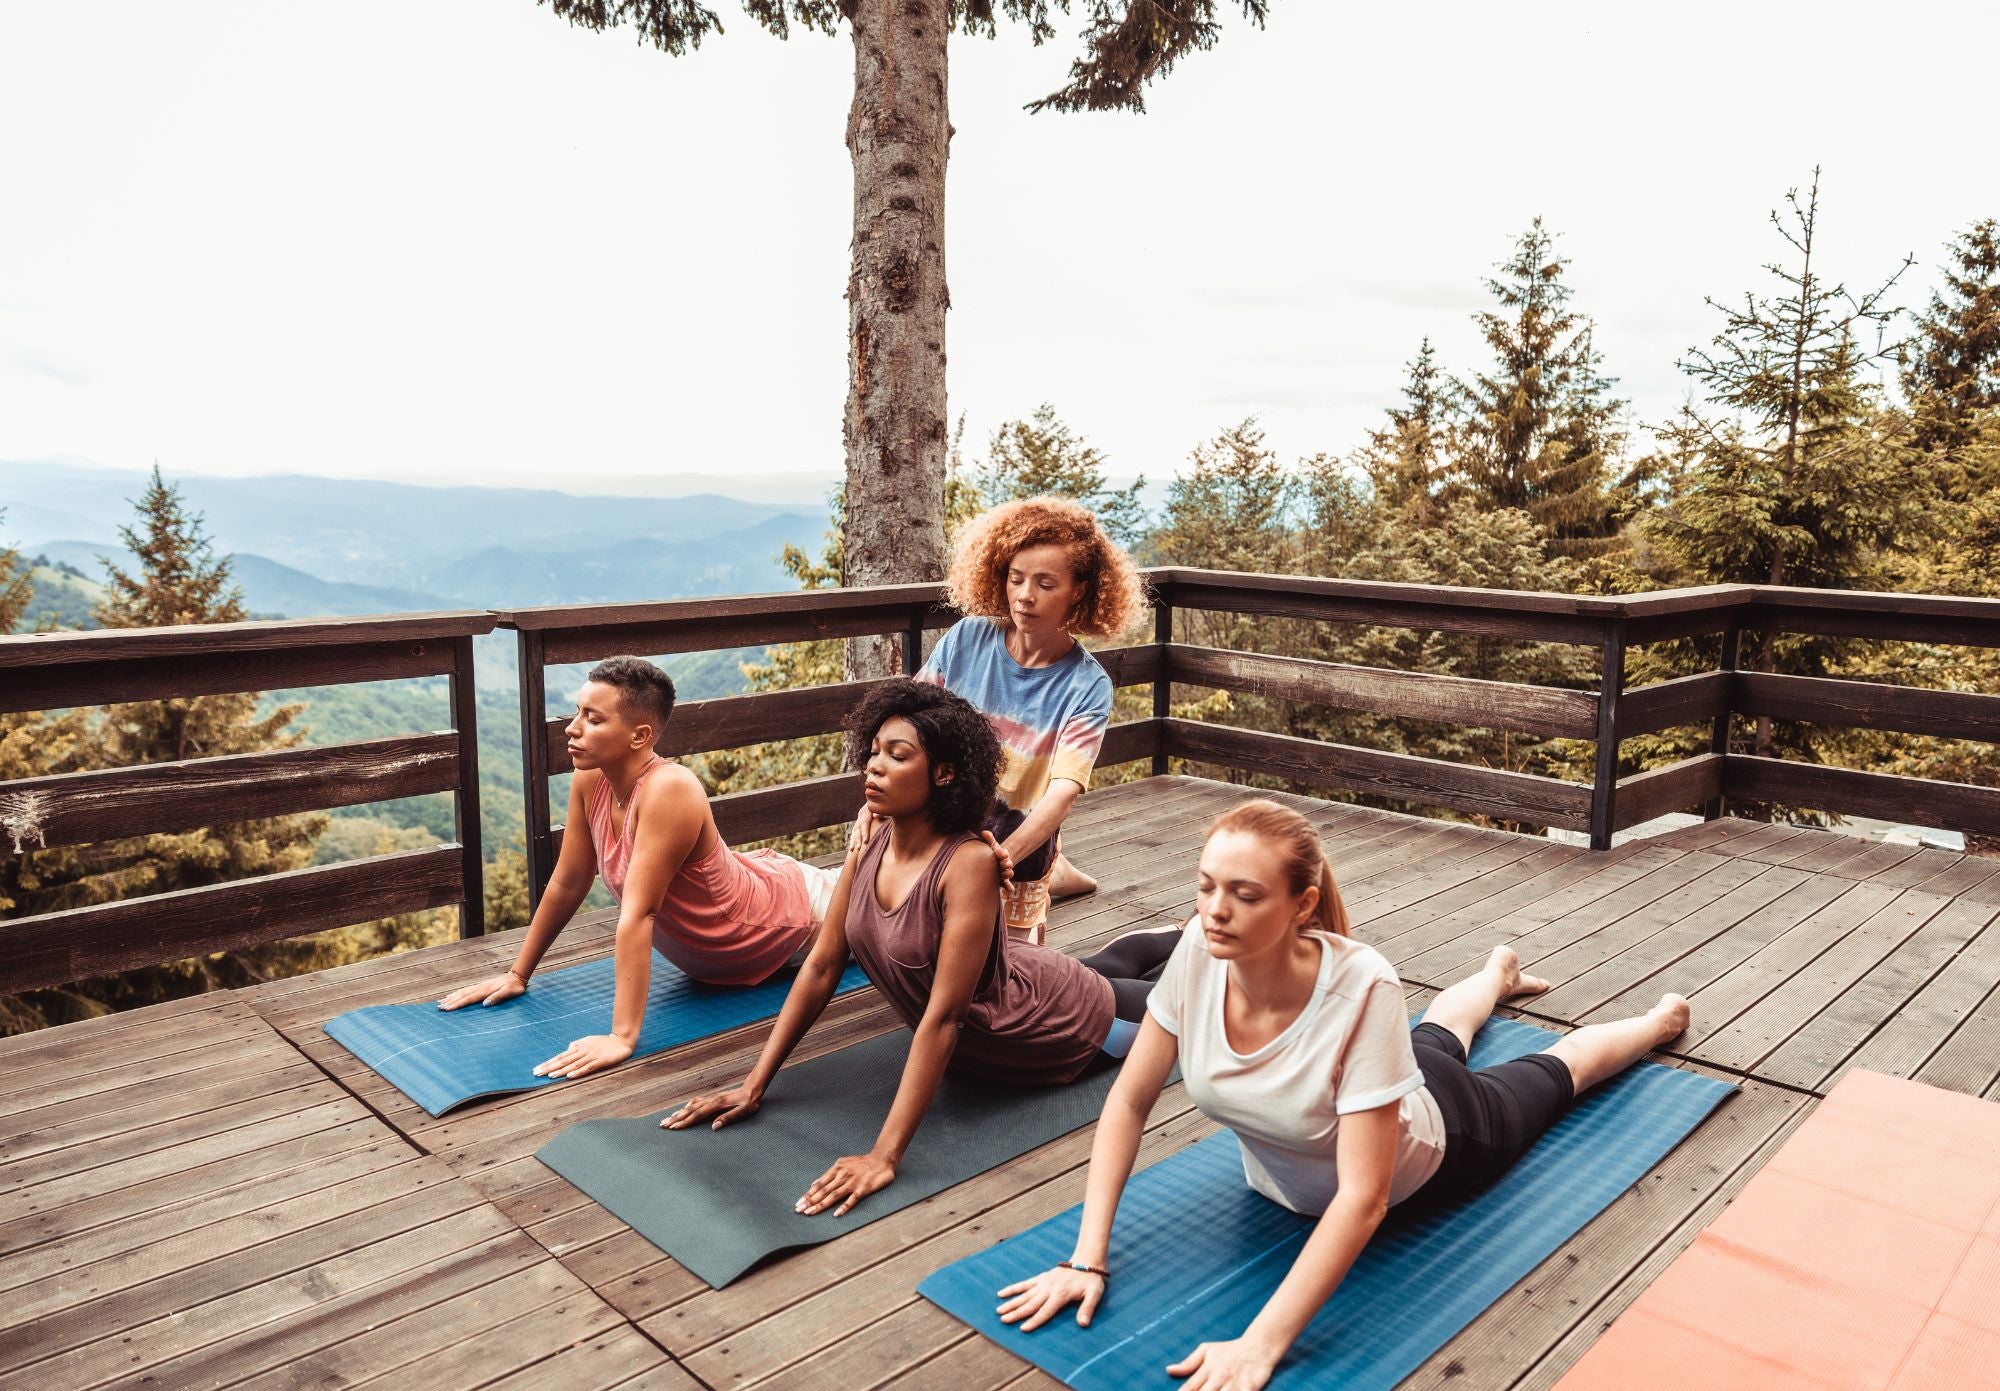 Fitness Retreat Destinations for Women in the US